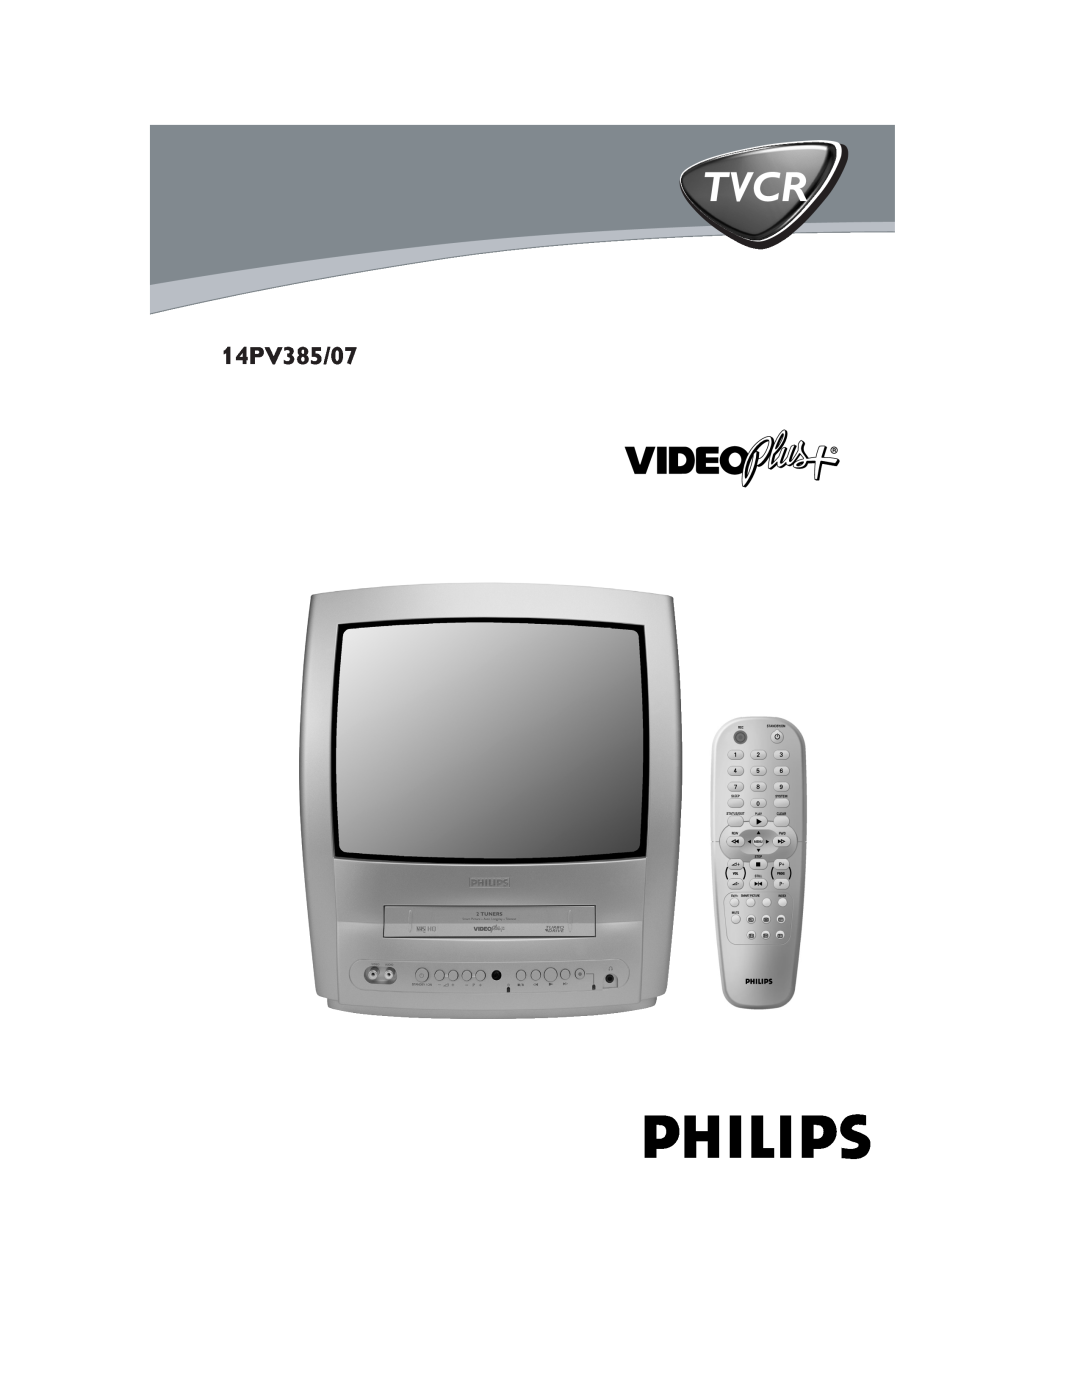 Philips 14PV385/07 manual Tvcr 